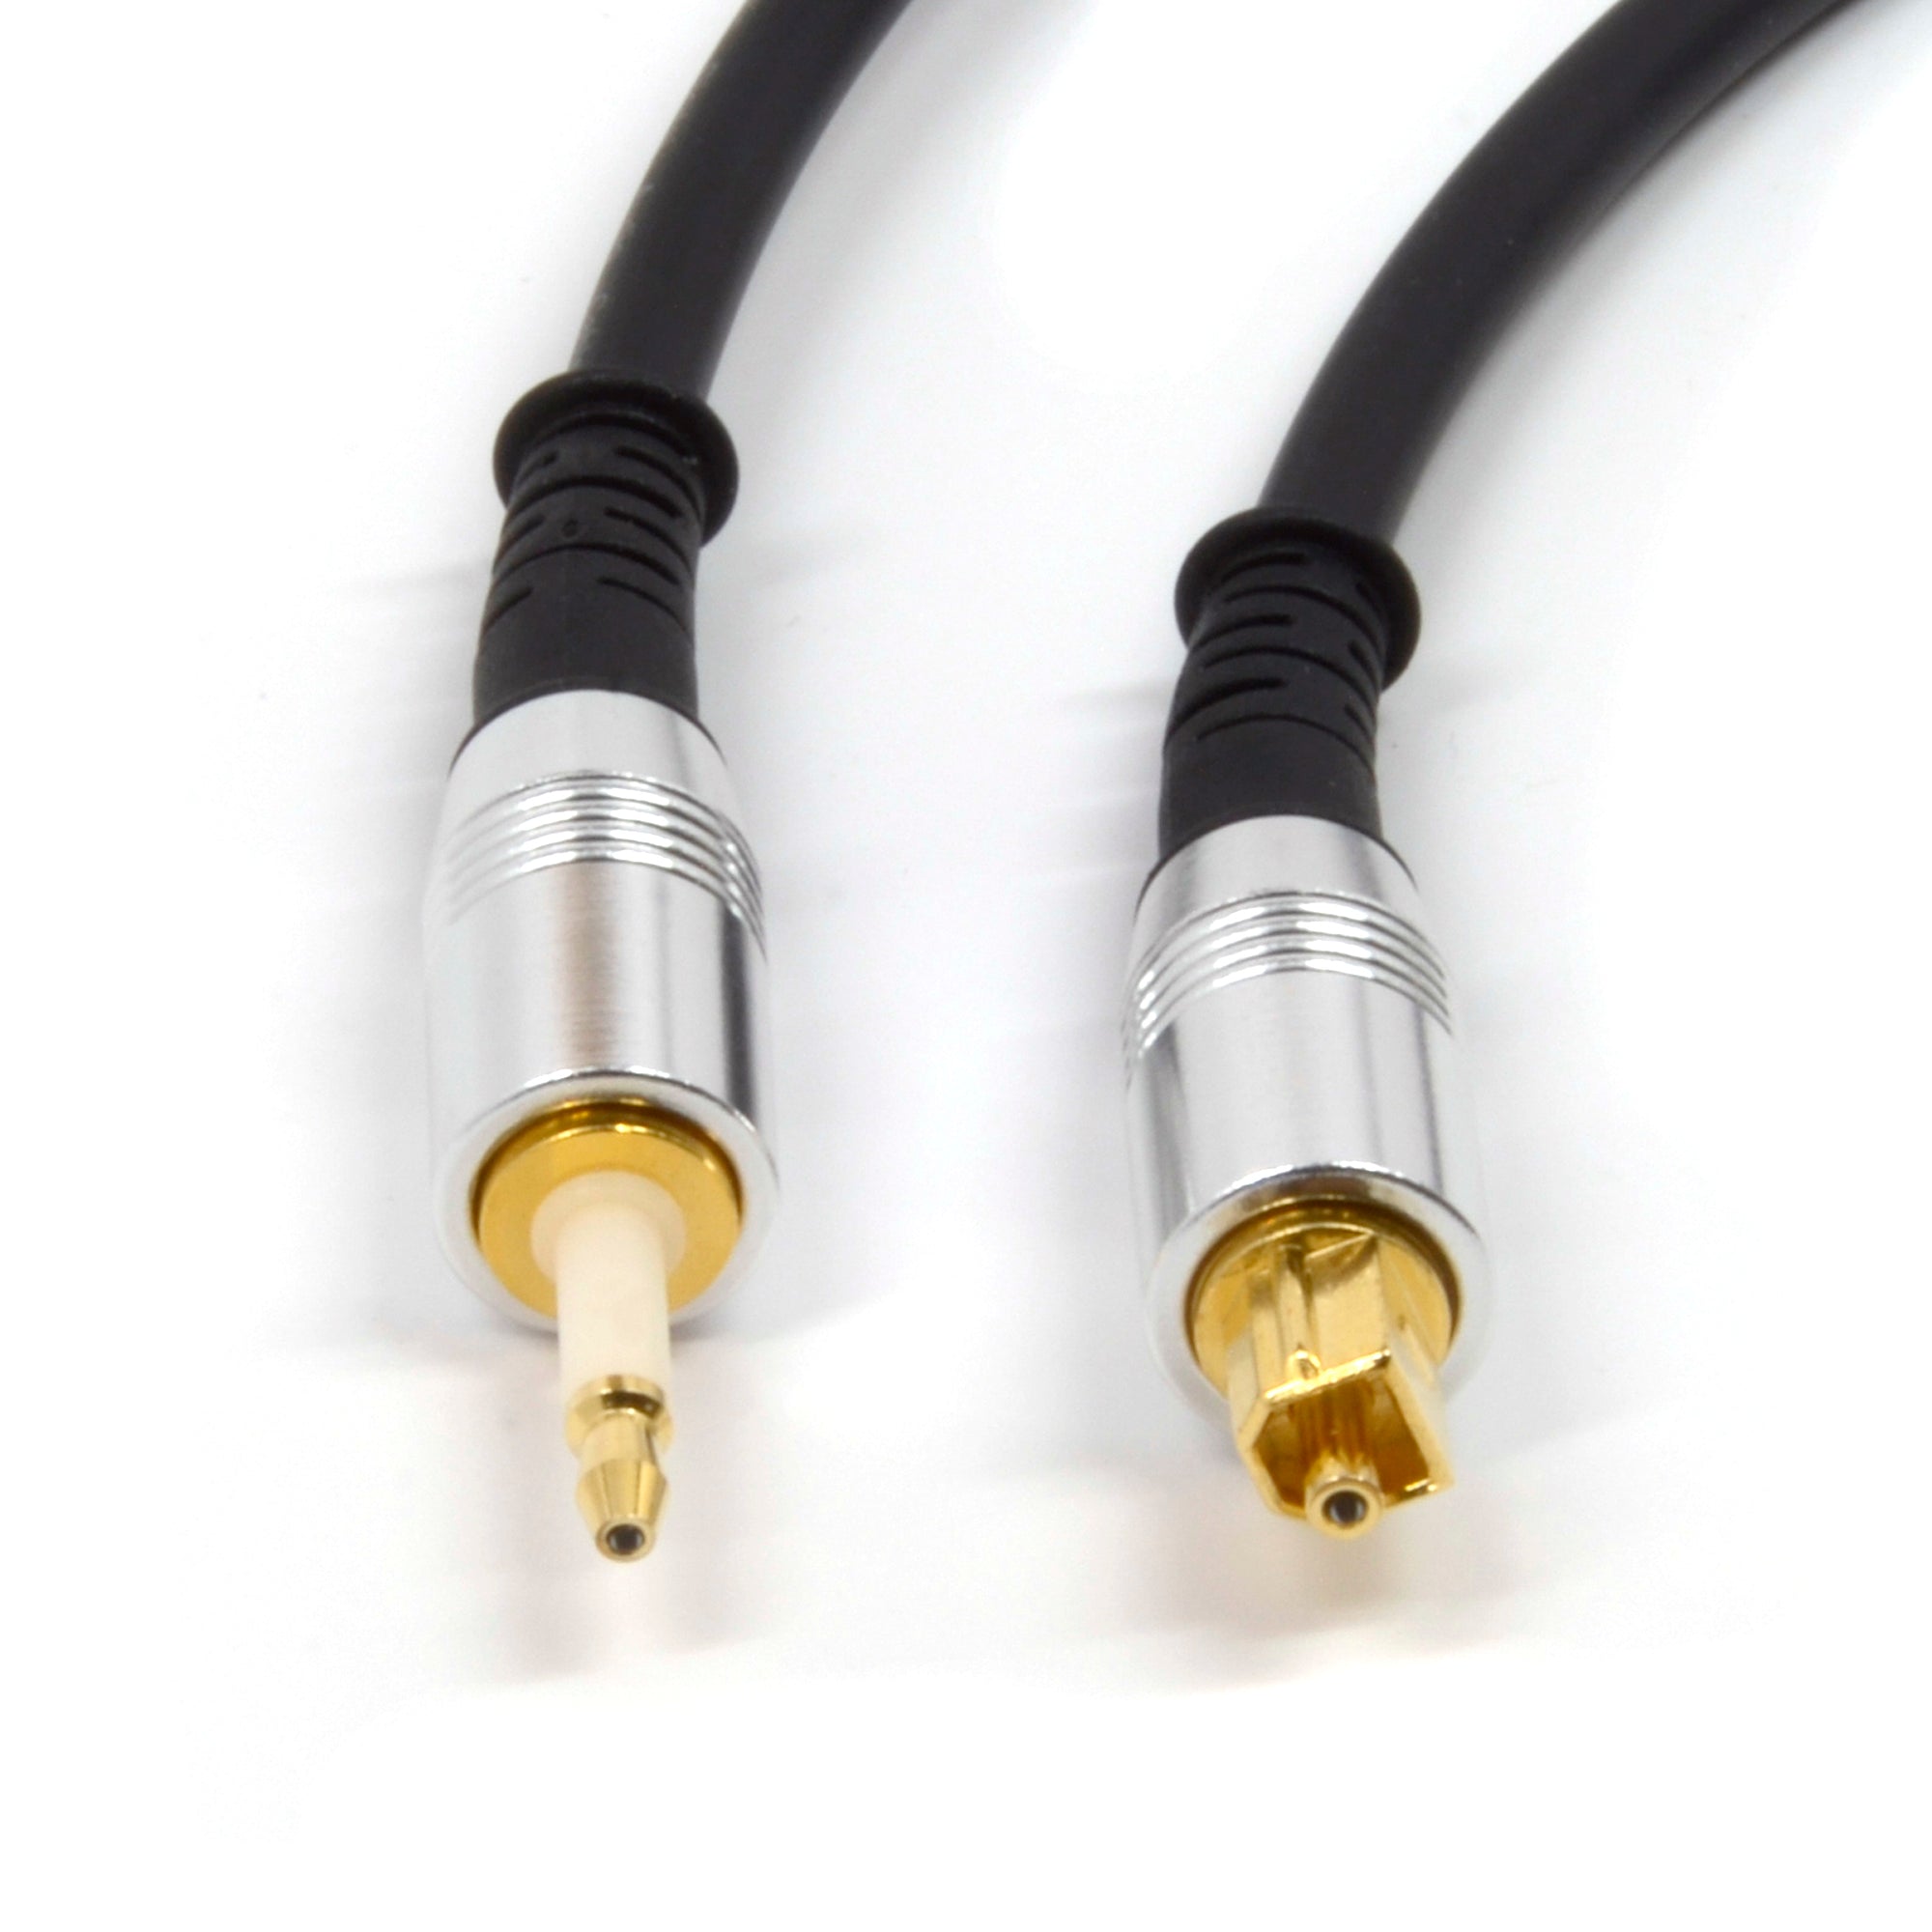 TOSLINK to MiniPlug Digital Audio Cable with Metal Connectors